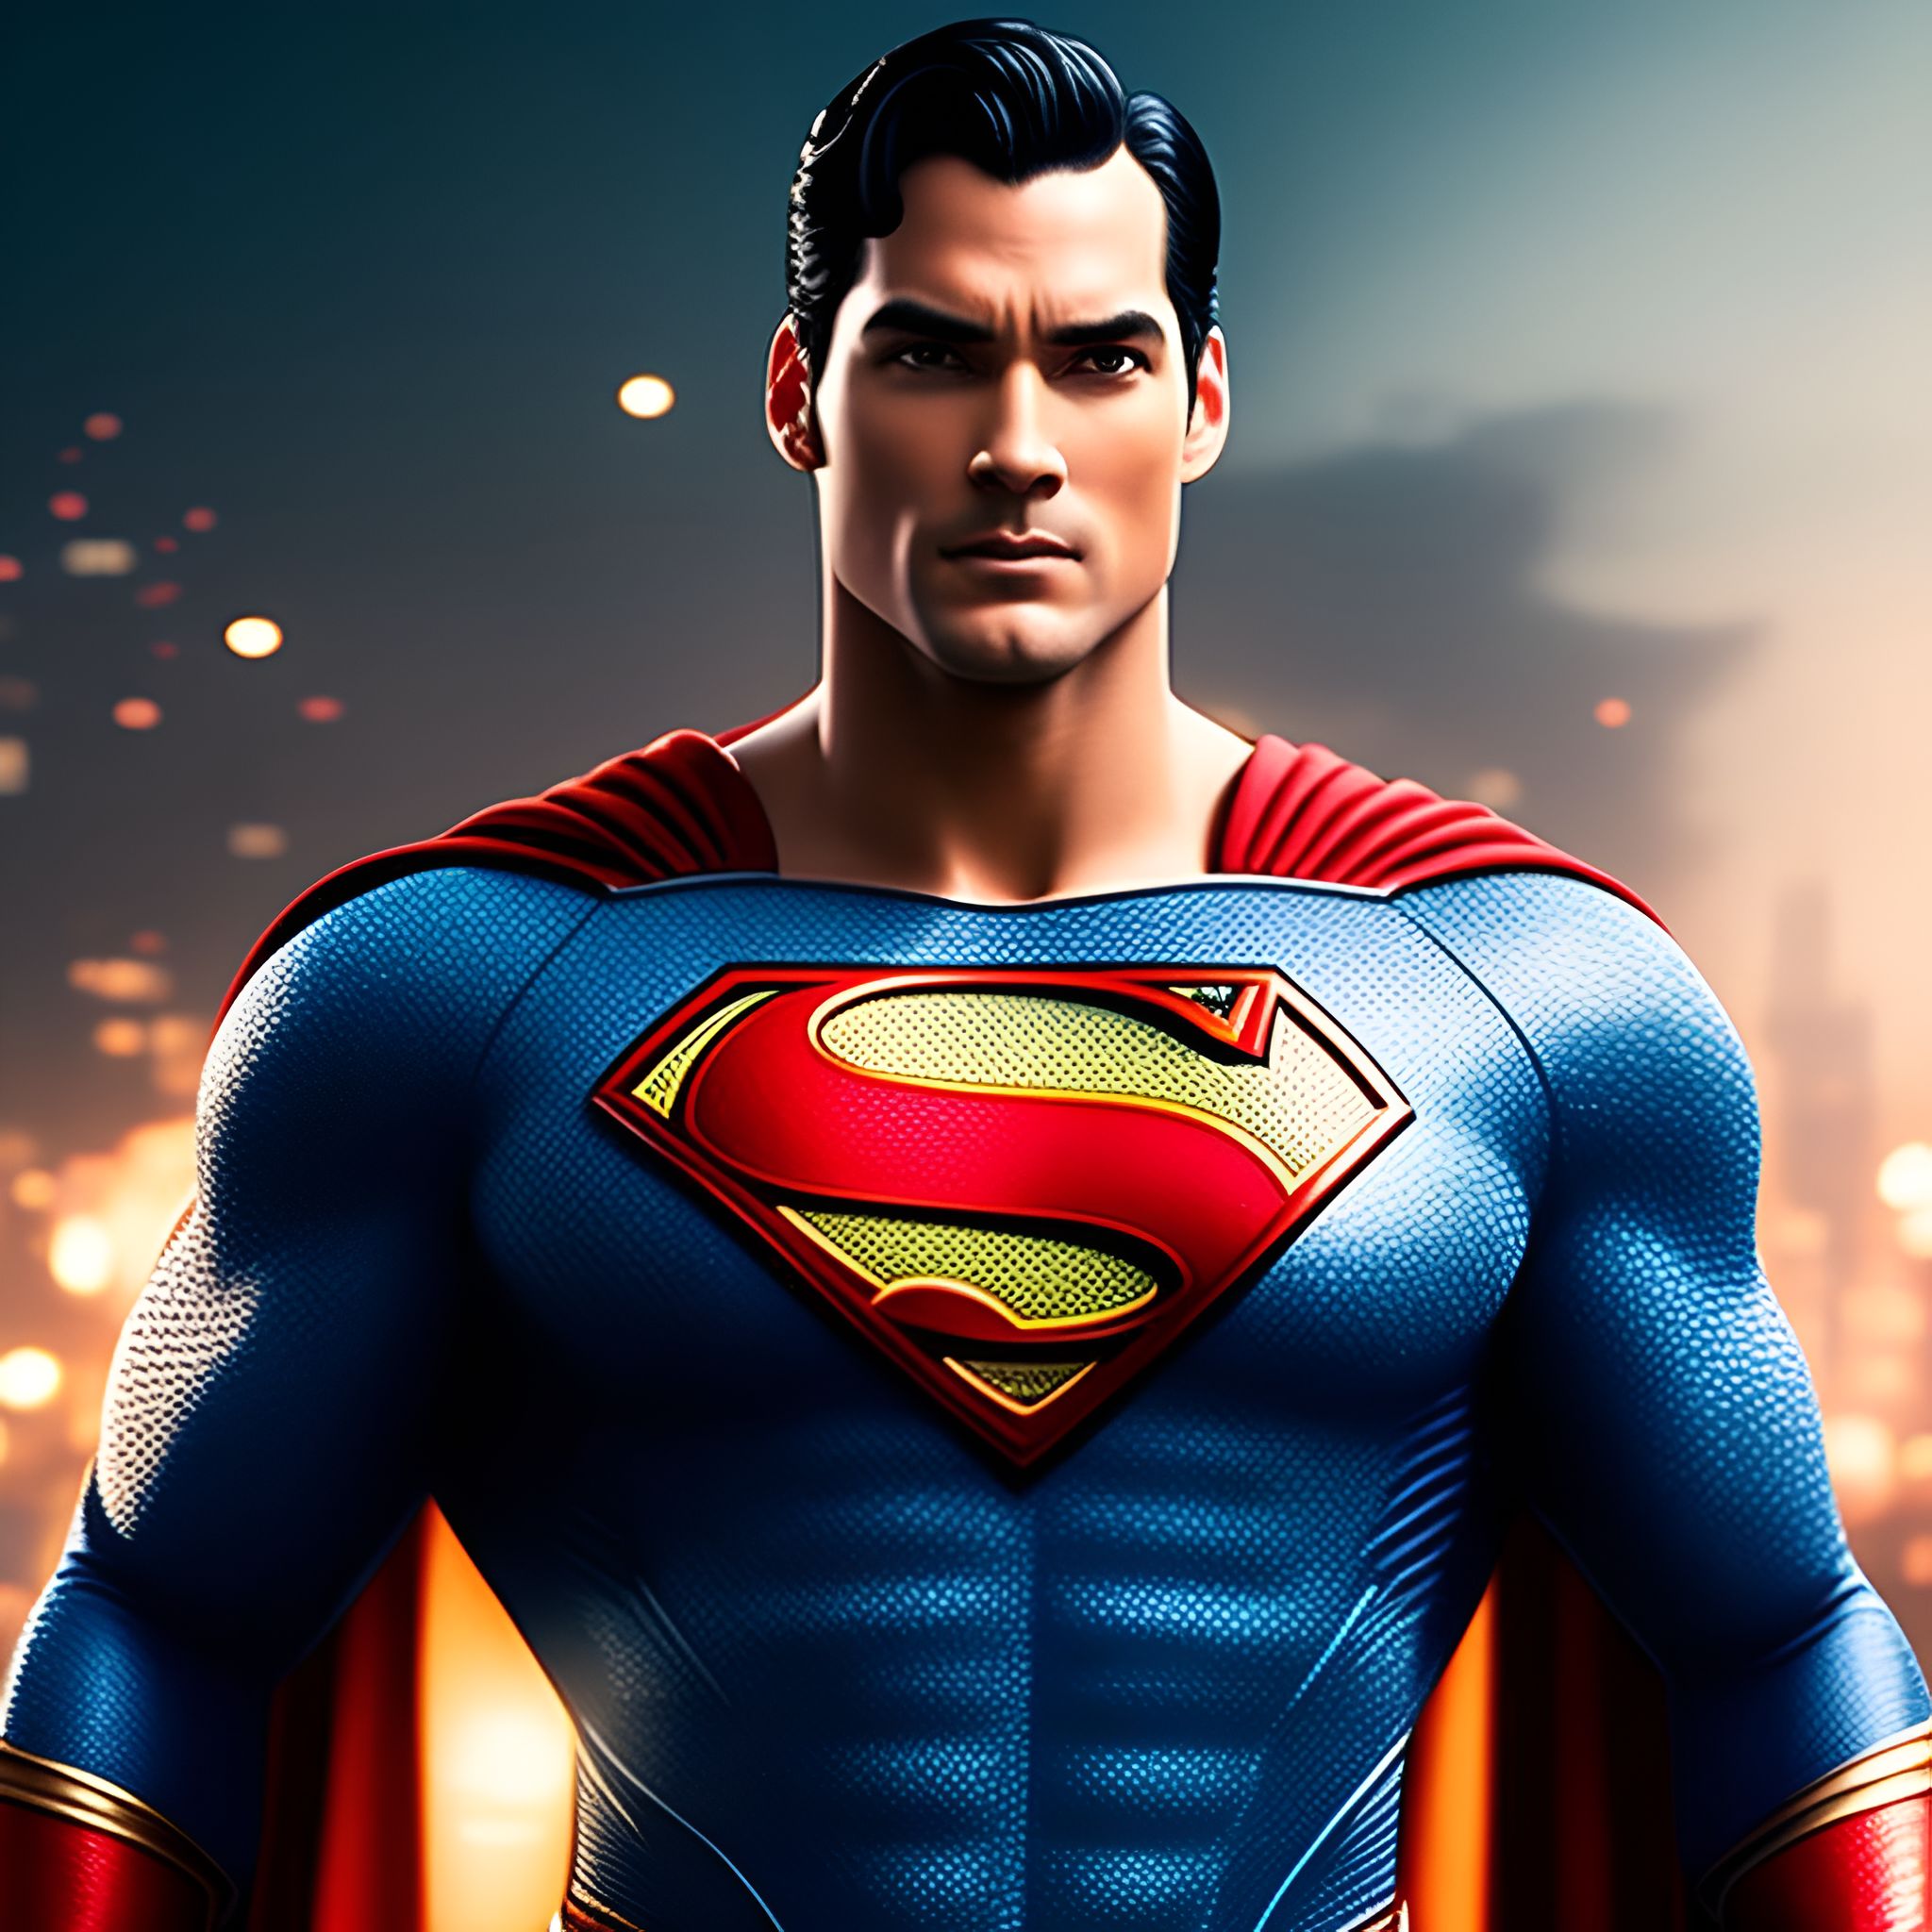 sleepy-gull200: Will Smith, wearing Superman costume, handsome, realistic,  city background